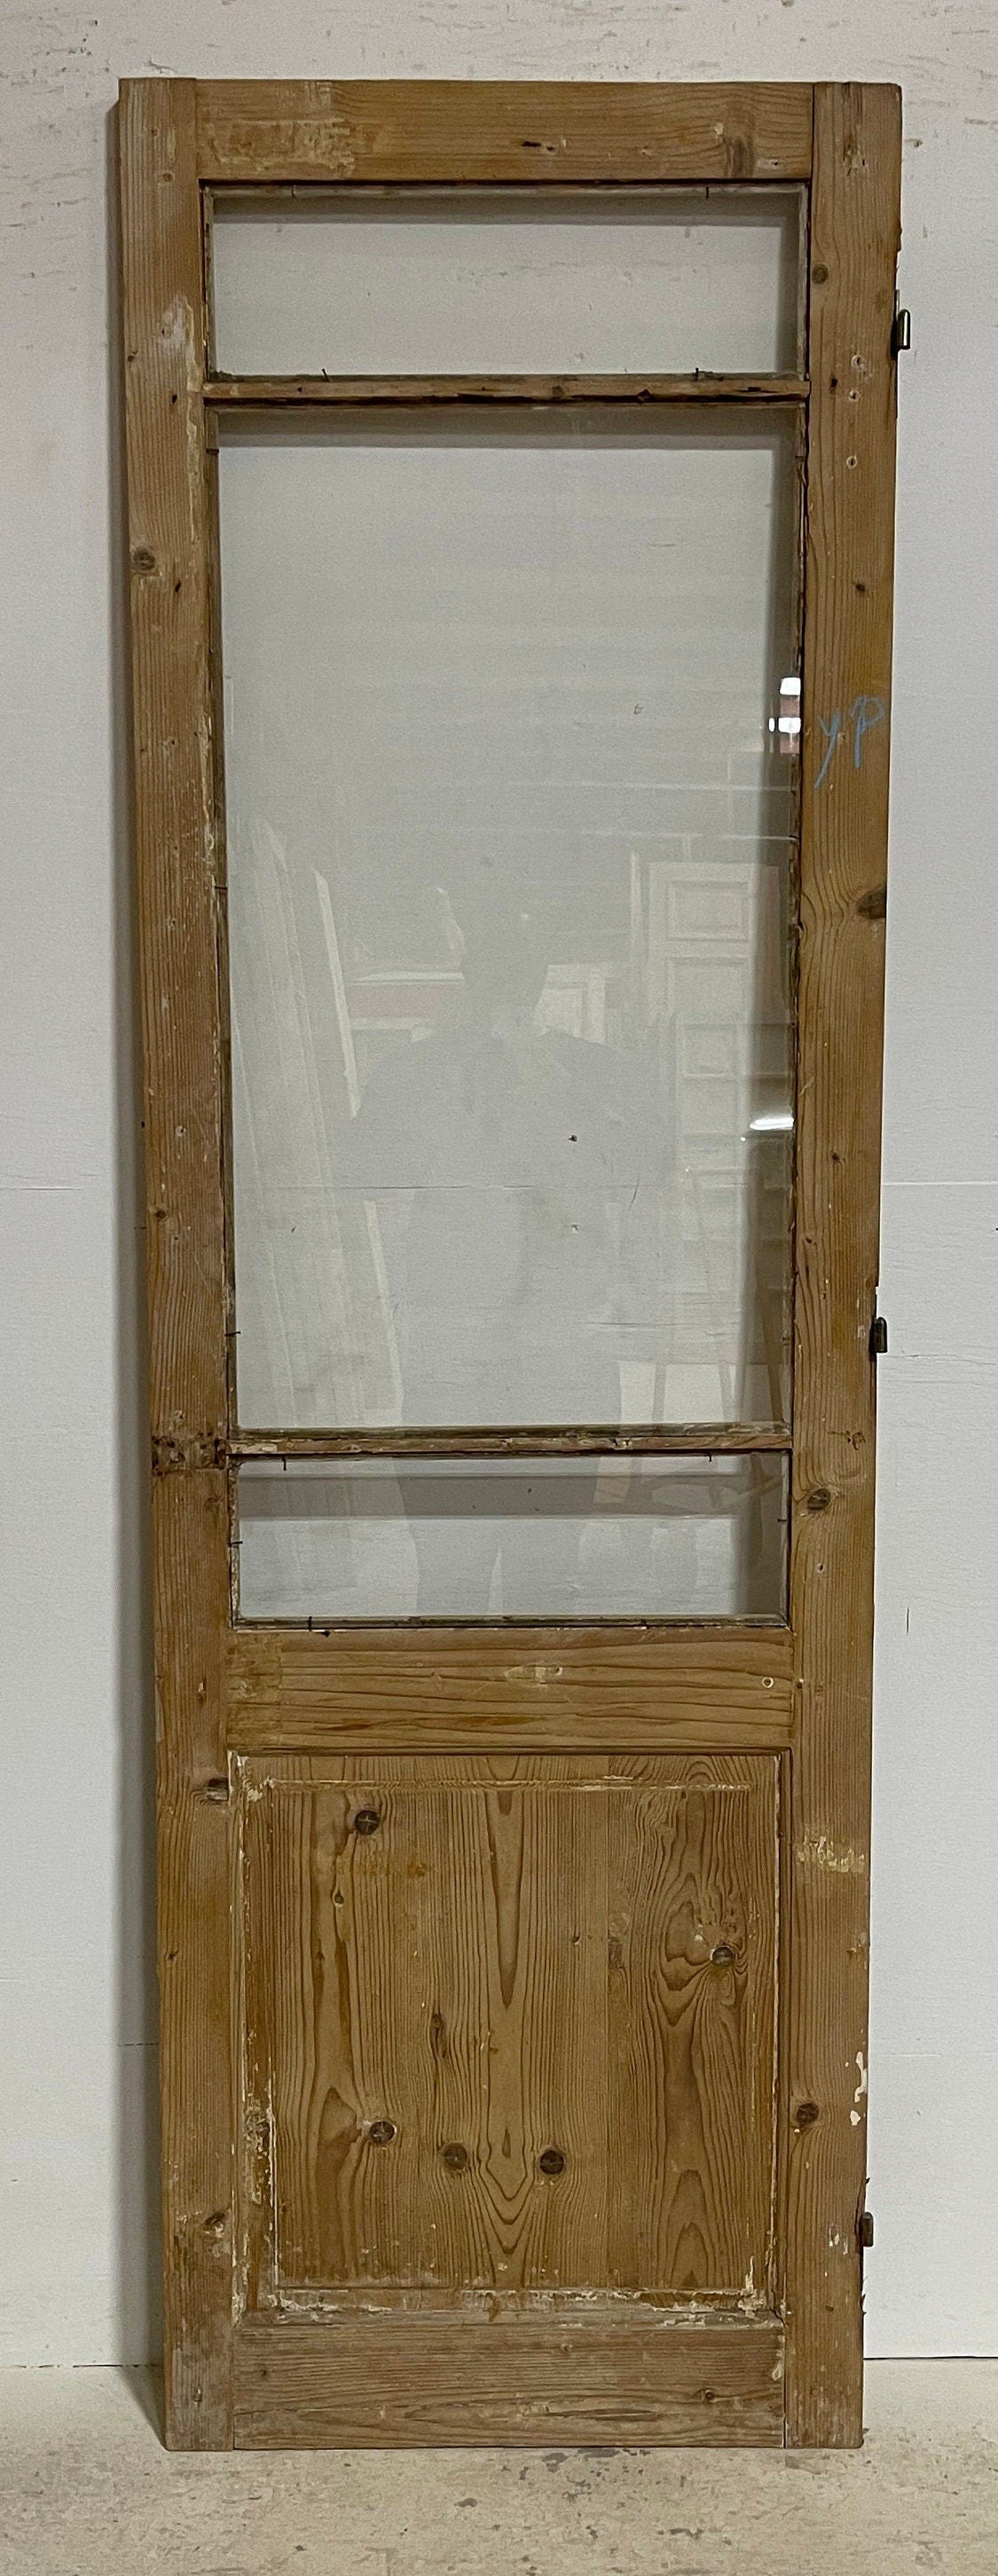 Antique French panel door with glass (86x26.75) G1254s